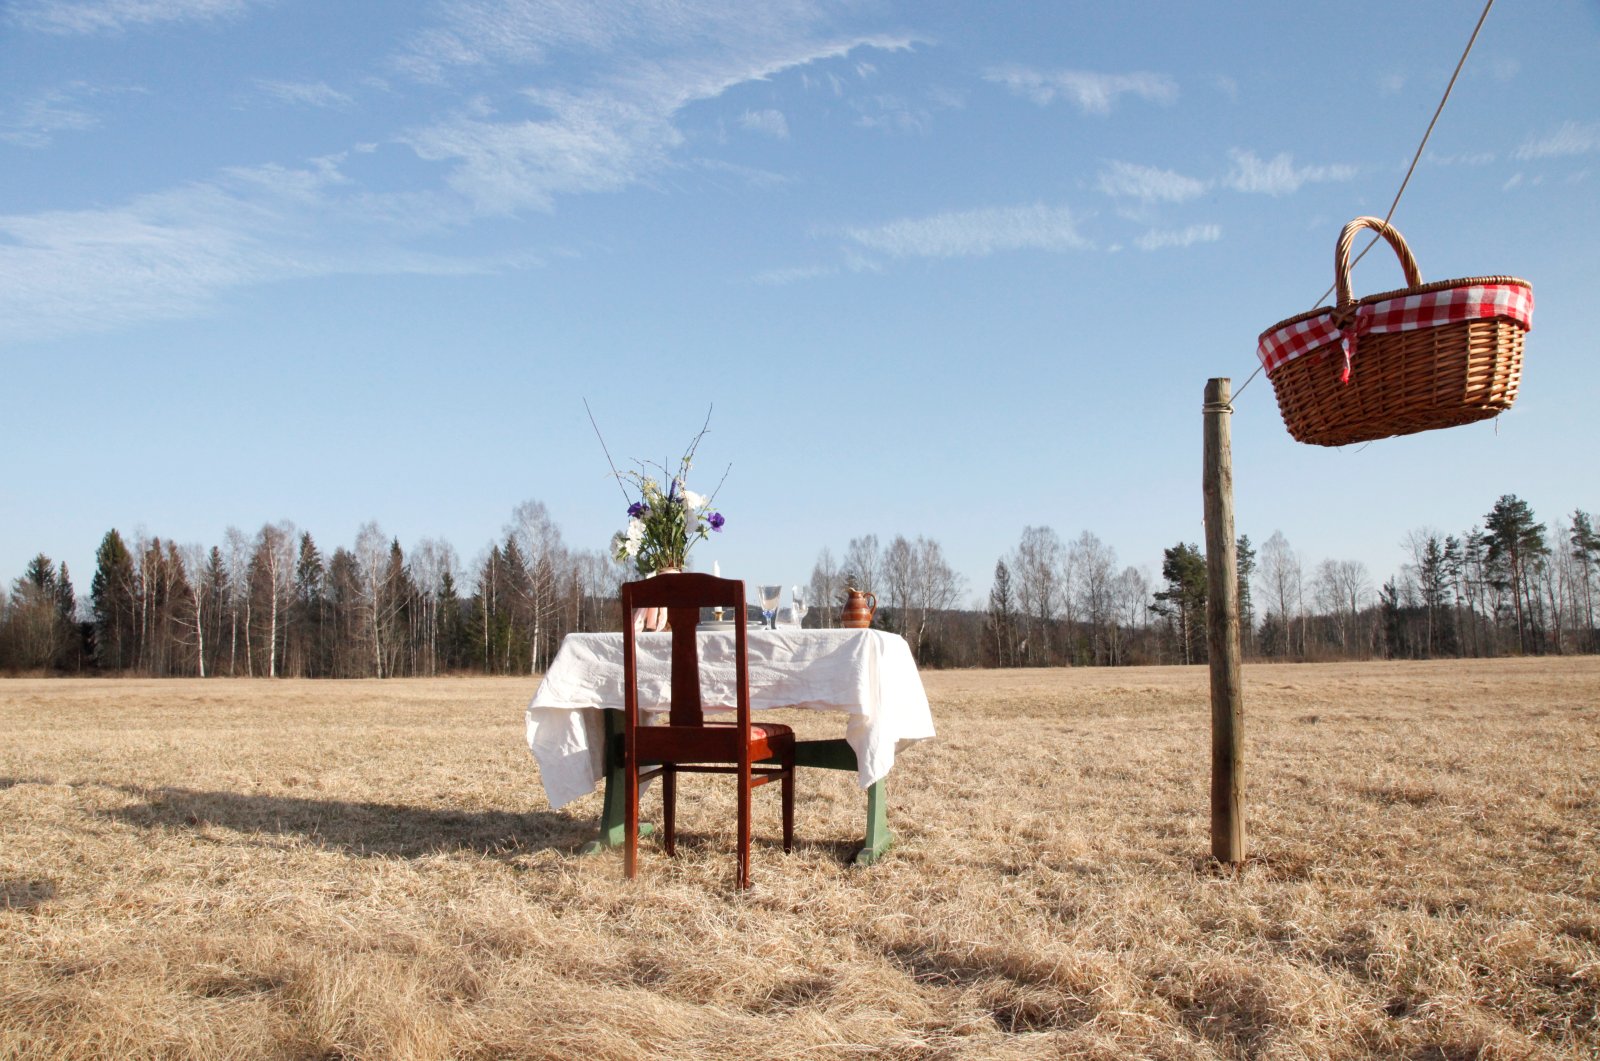 A Swedish couple has opened a COVID-19-safe pop-up restaurant in a meadow with one chair and one table in Umlautus, Ransater, Sweden, March 26, 2020. (Reuters Photo)